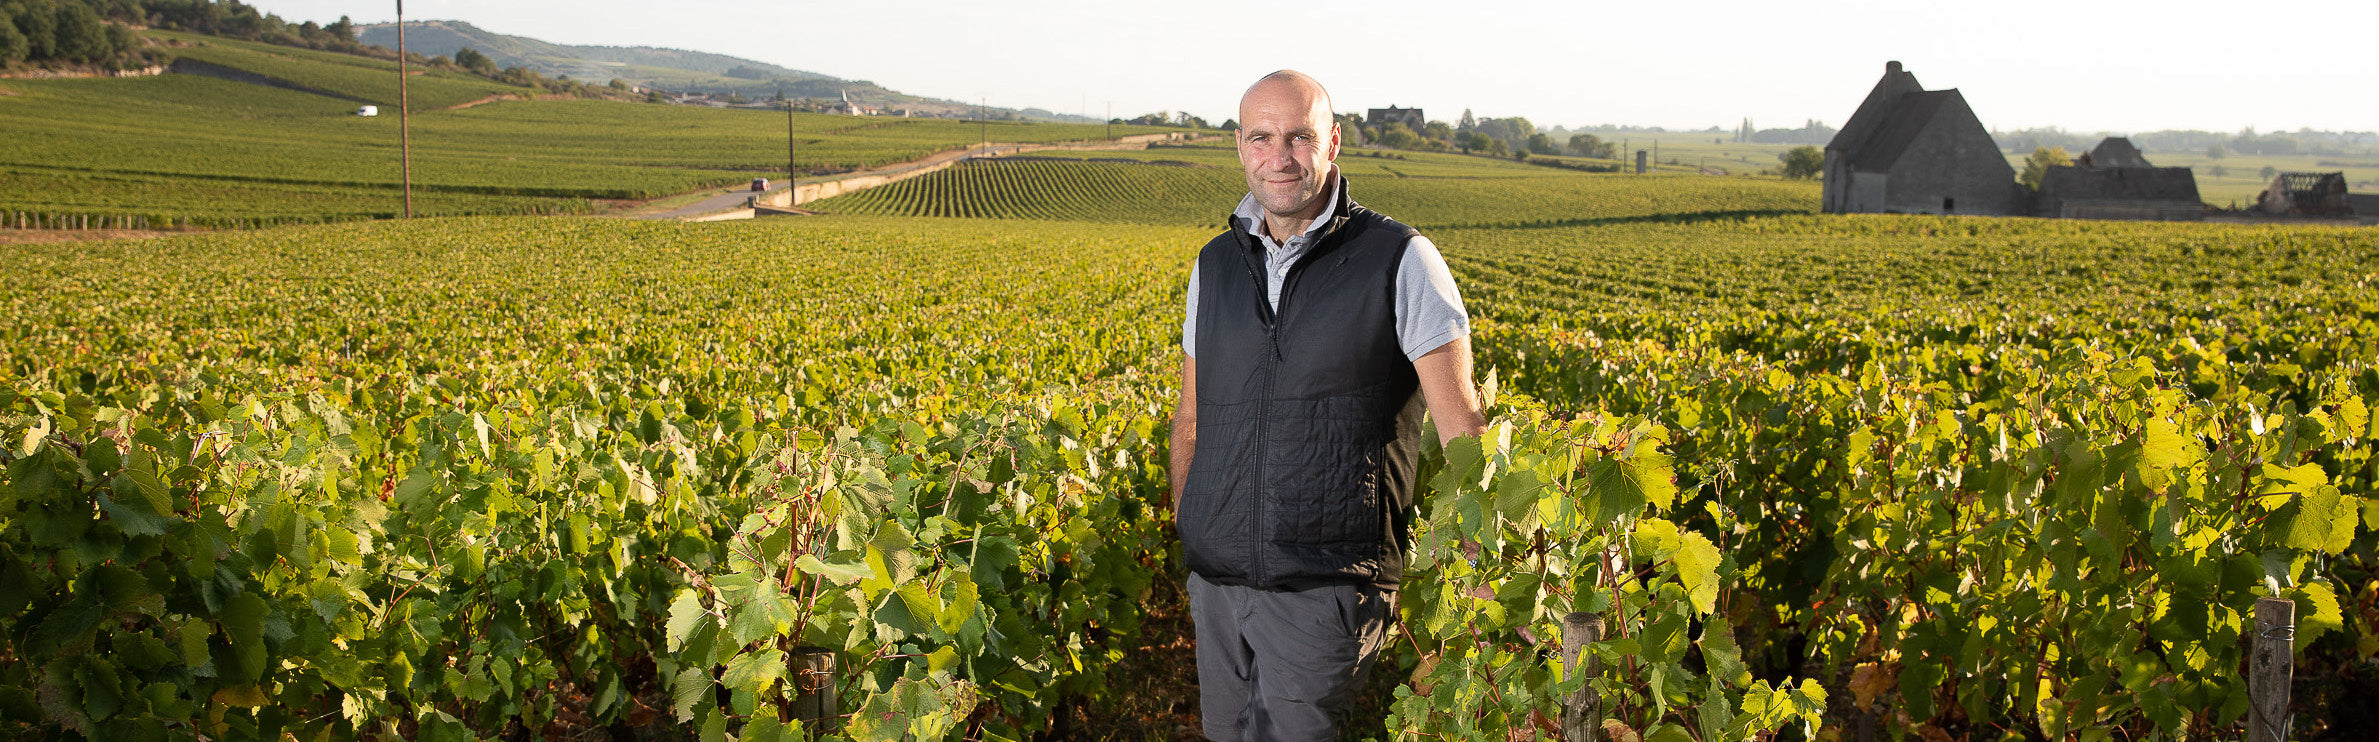 Domaine Pierre-Yves Colin-Morey